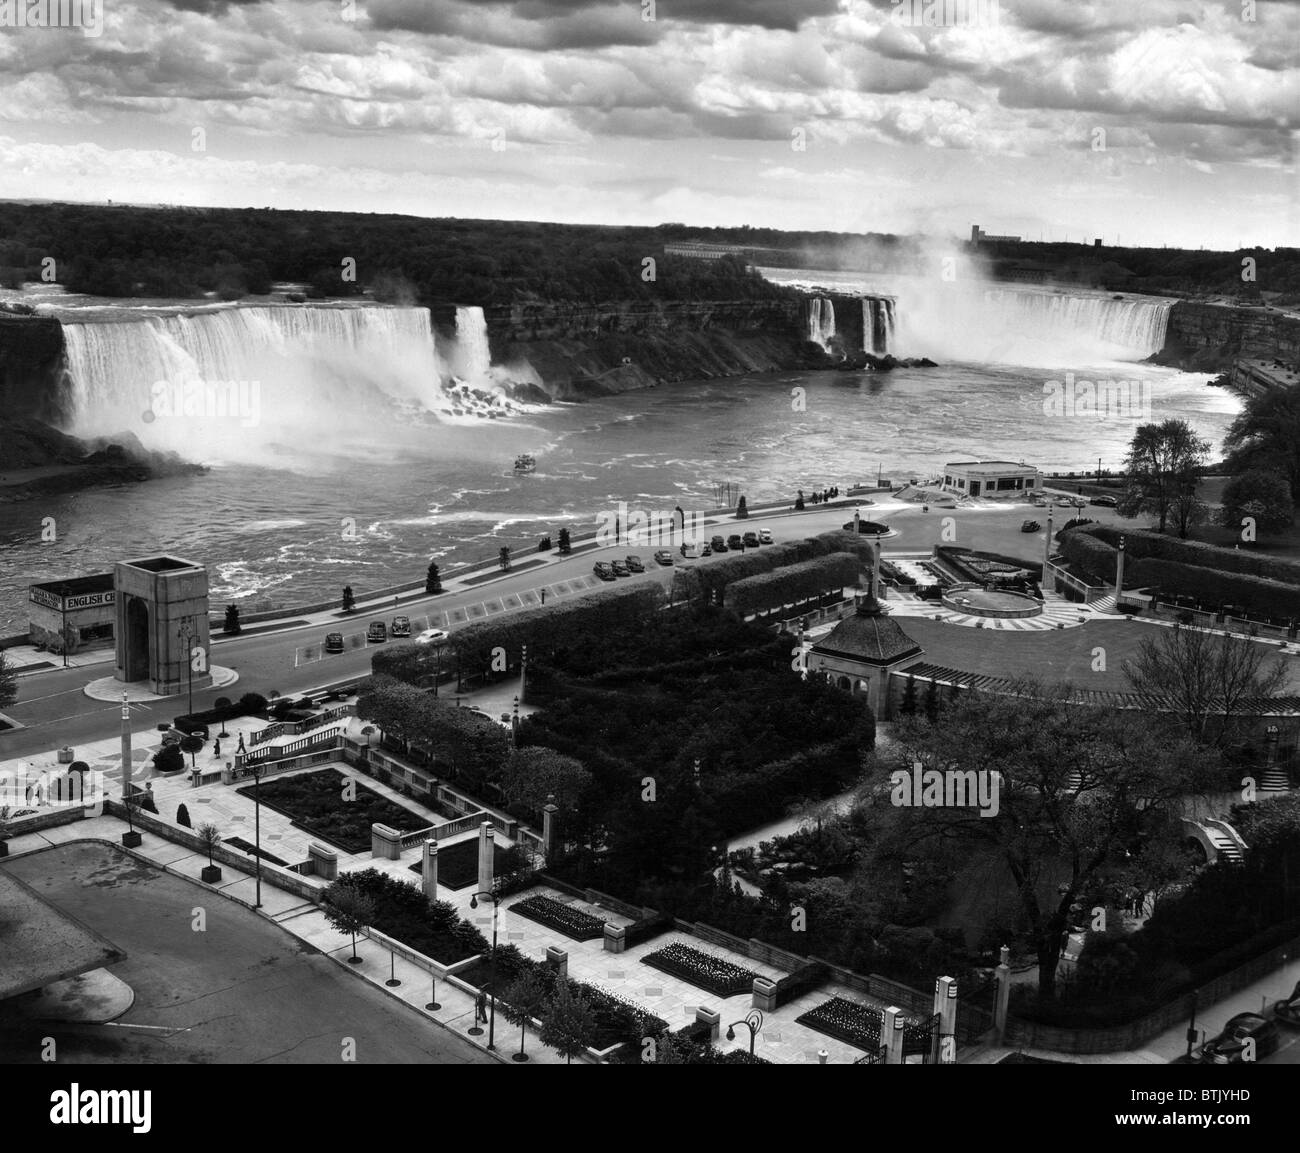 Niagara Falls, from the Canadian side, to the left is the American Falls. Circa 1940s. CSU Archives/Courtesy Everett Collection Stock Photo